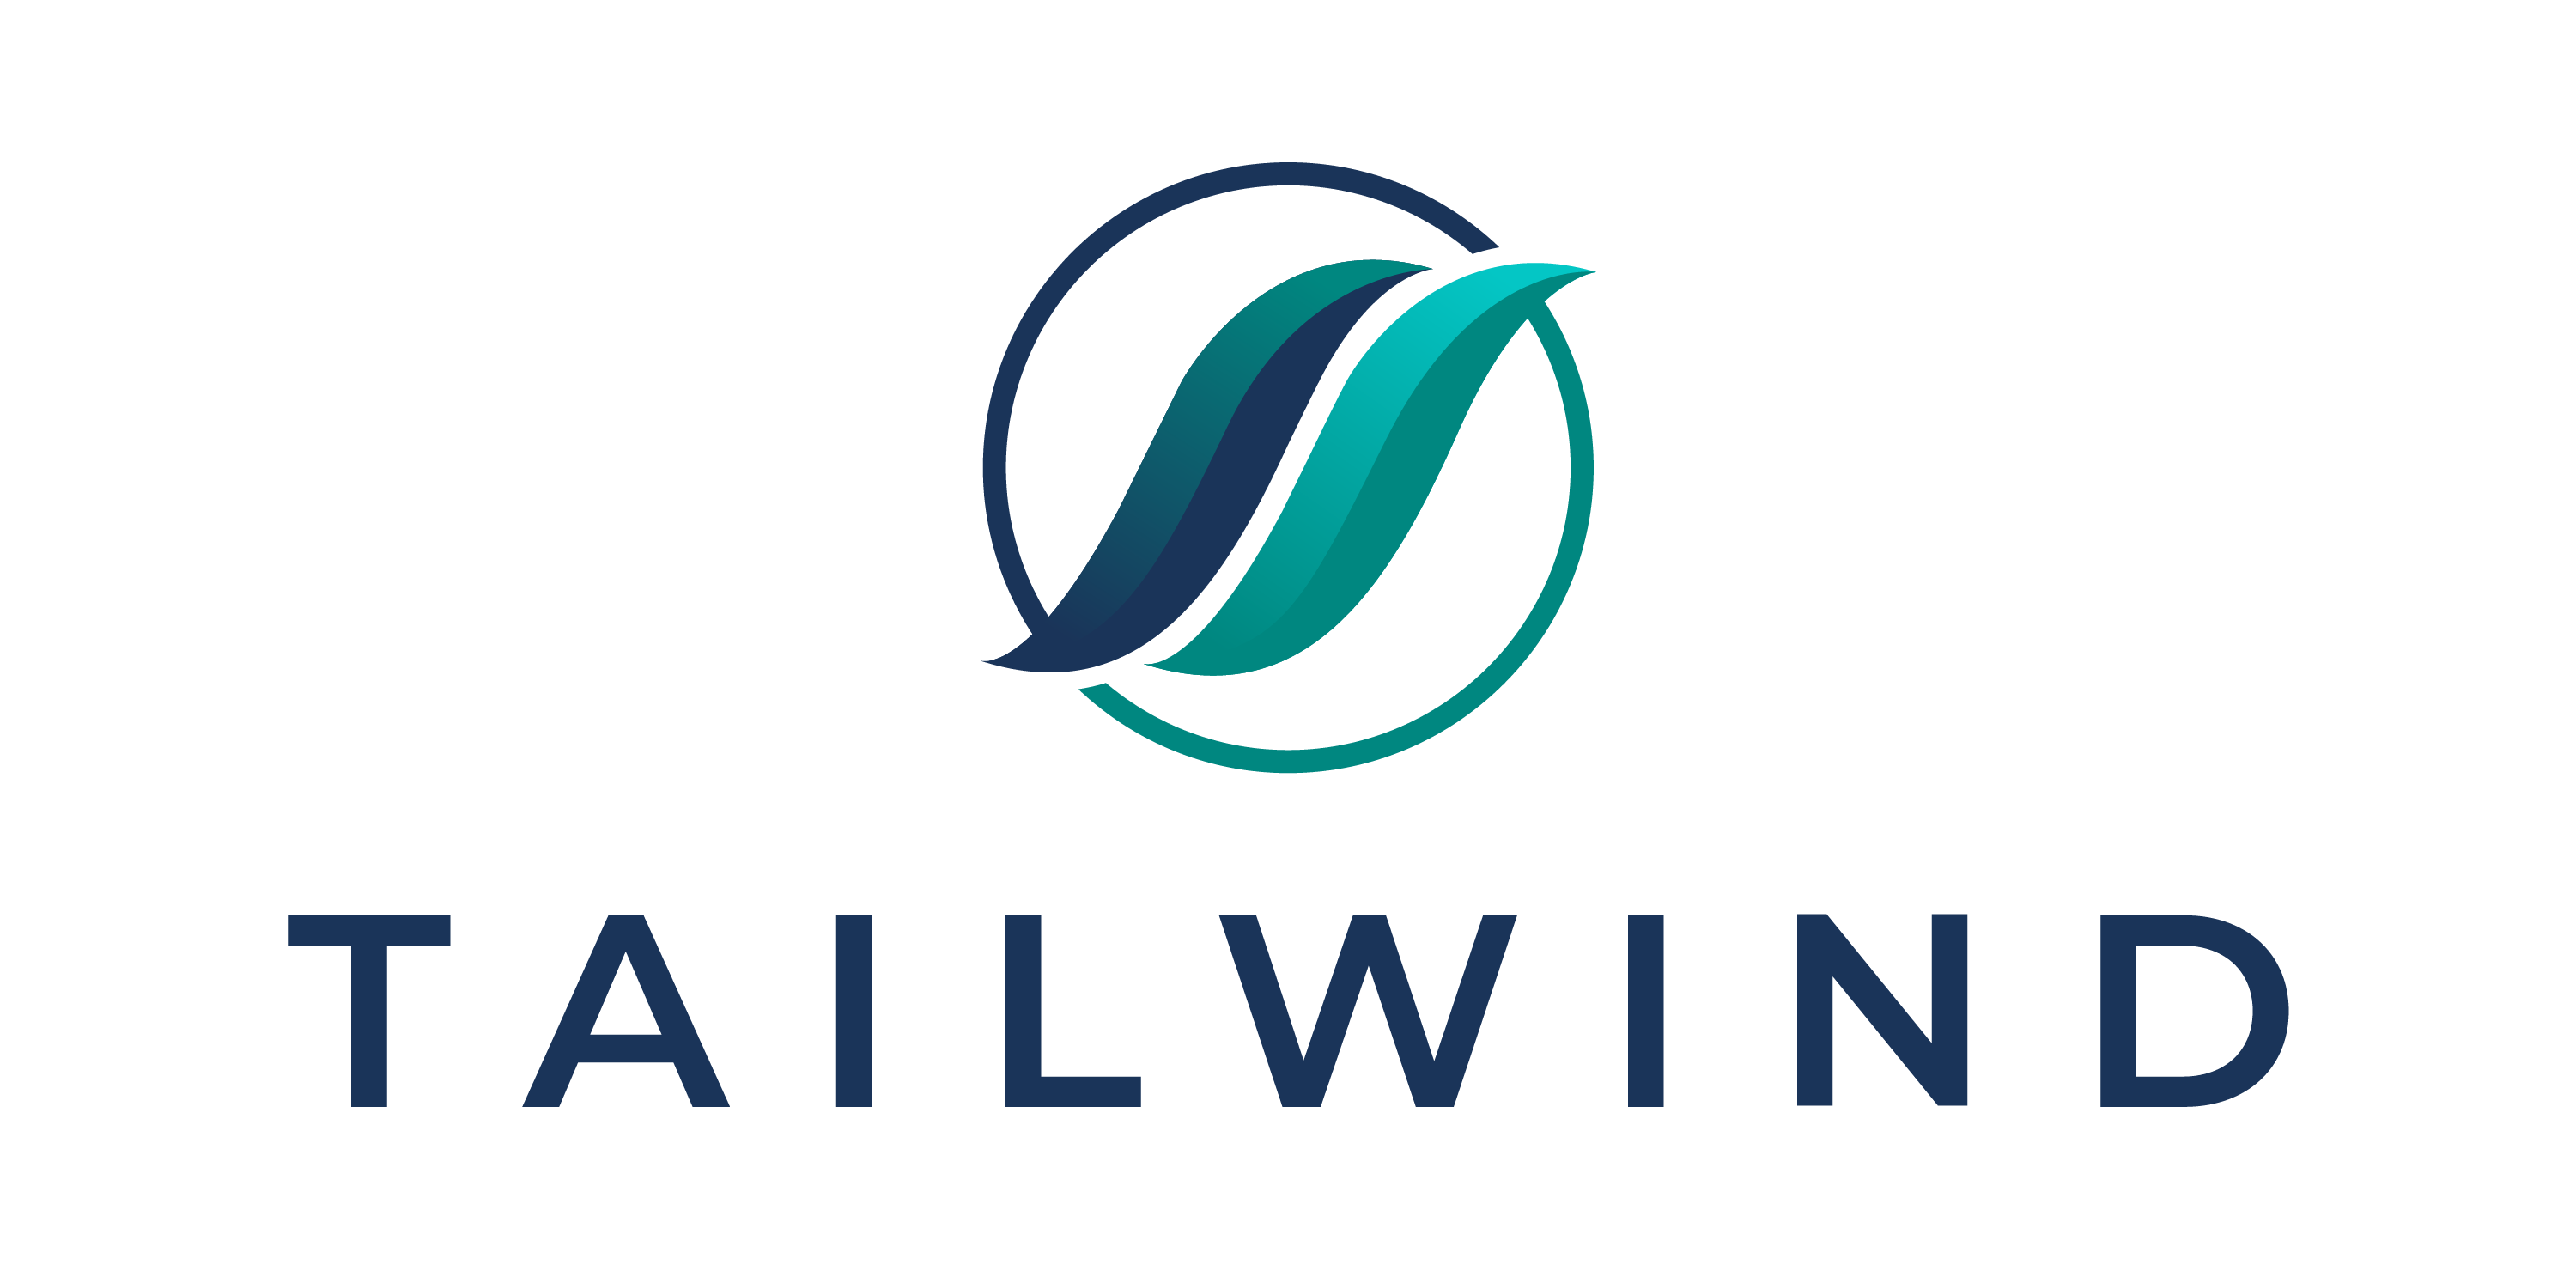 Tailwind coupon codes, promo codes and deals